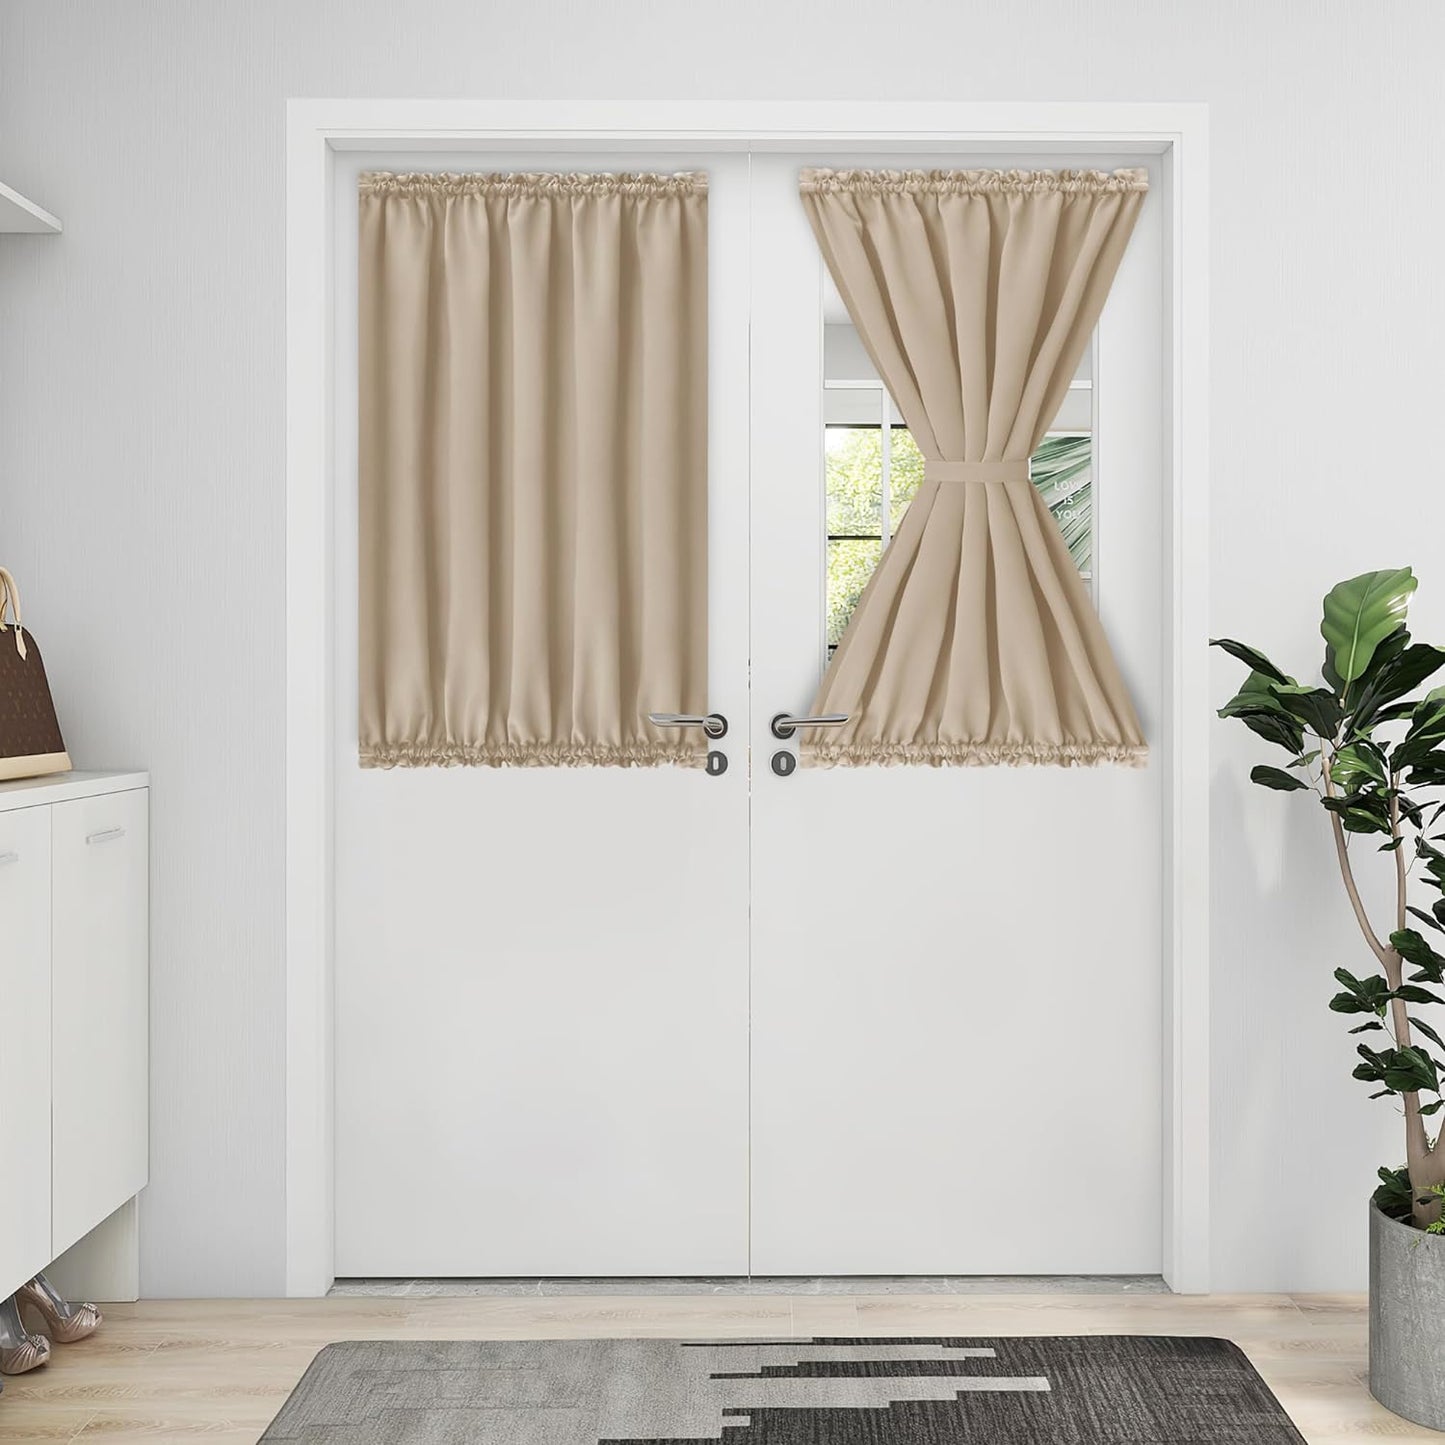 Easy-Going Blackout Door Curtains, Rod Pocket Privacy Light Filtering Sidelight Curtains French Door Curtains with Tieback, 1 Panel, 25X40 Inch, Gray  Easy-Going Beige W25 X L40 Inch 